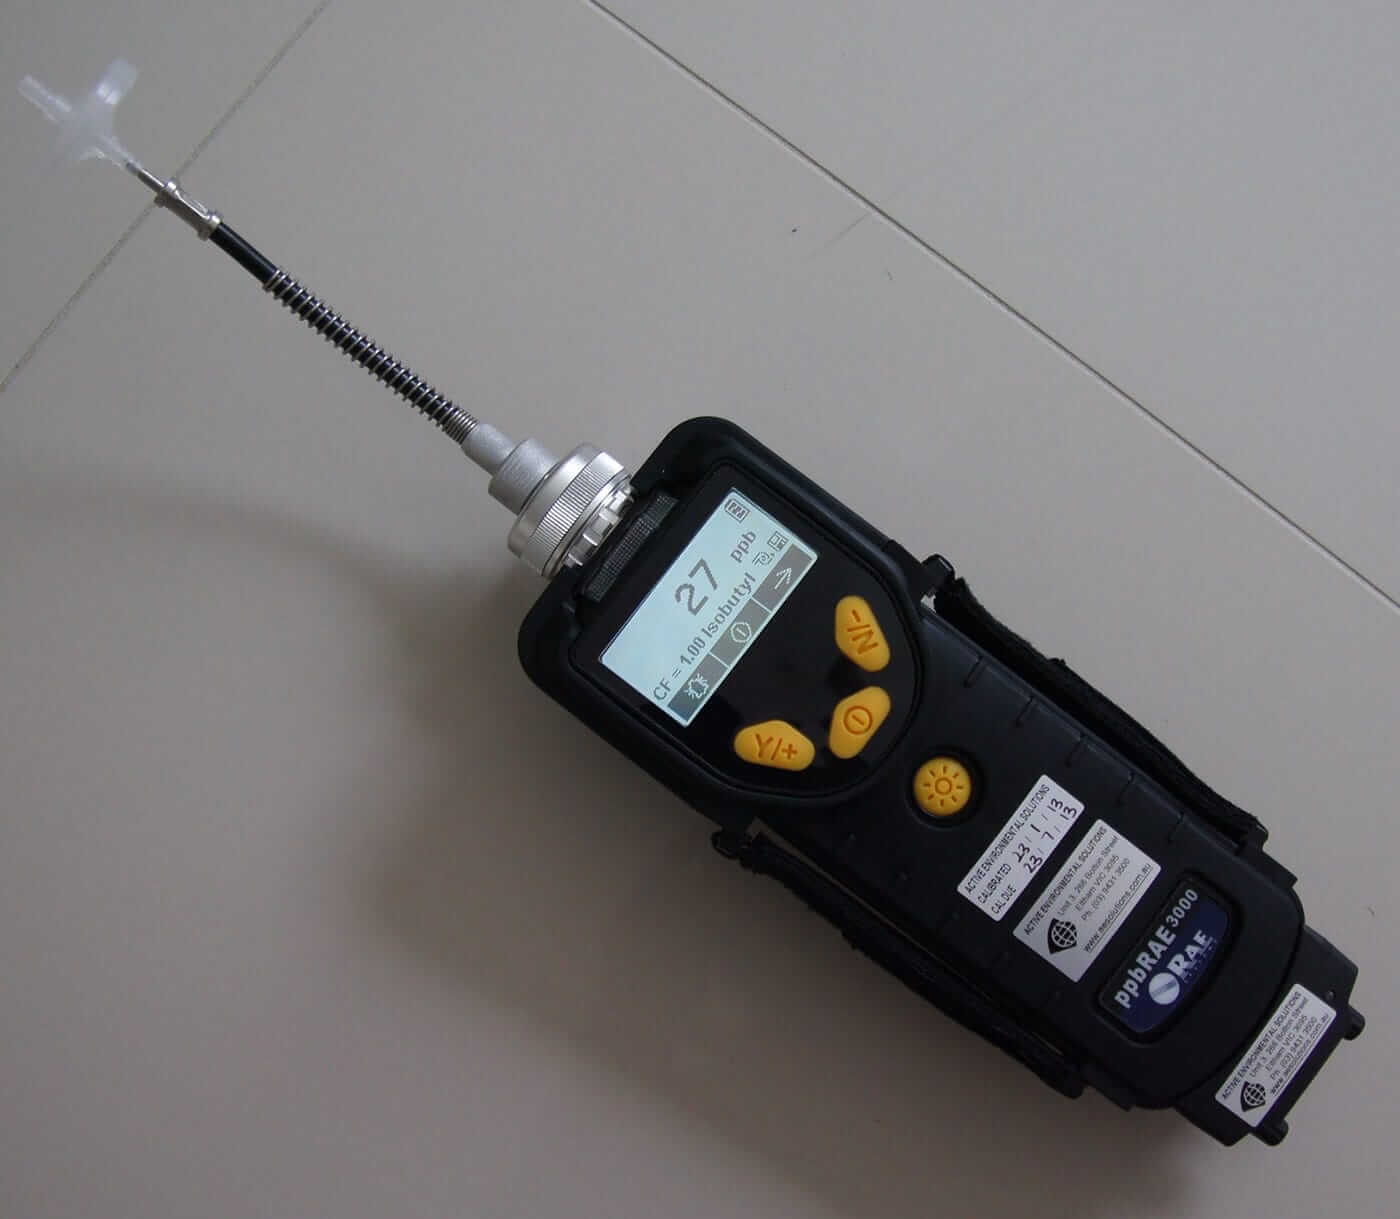 A small electronic device is sitting on a table, conducting air quality testing.